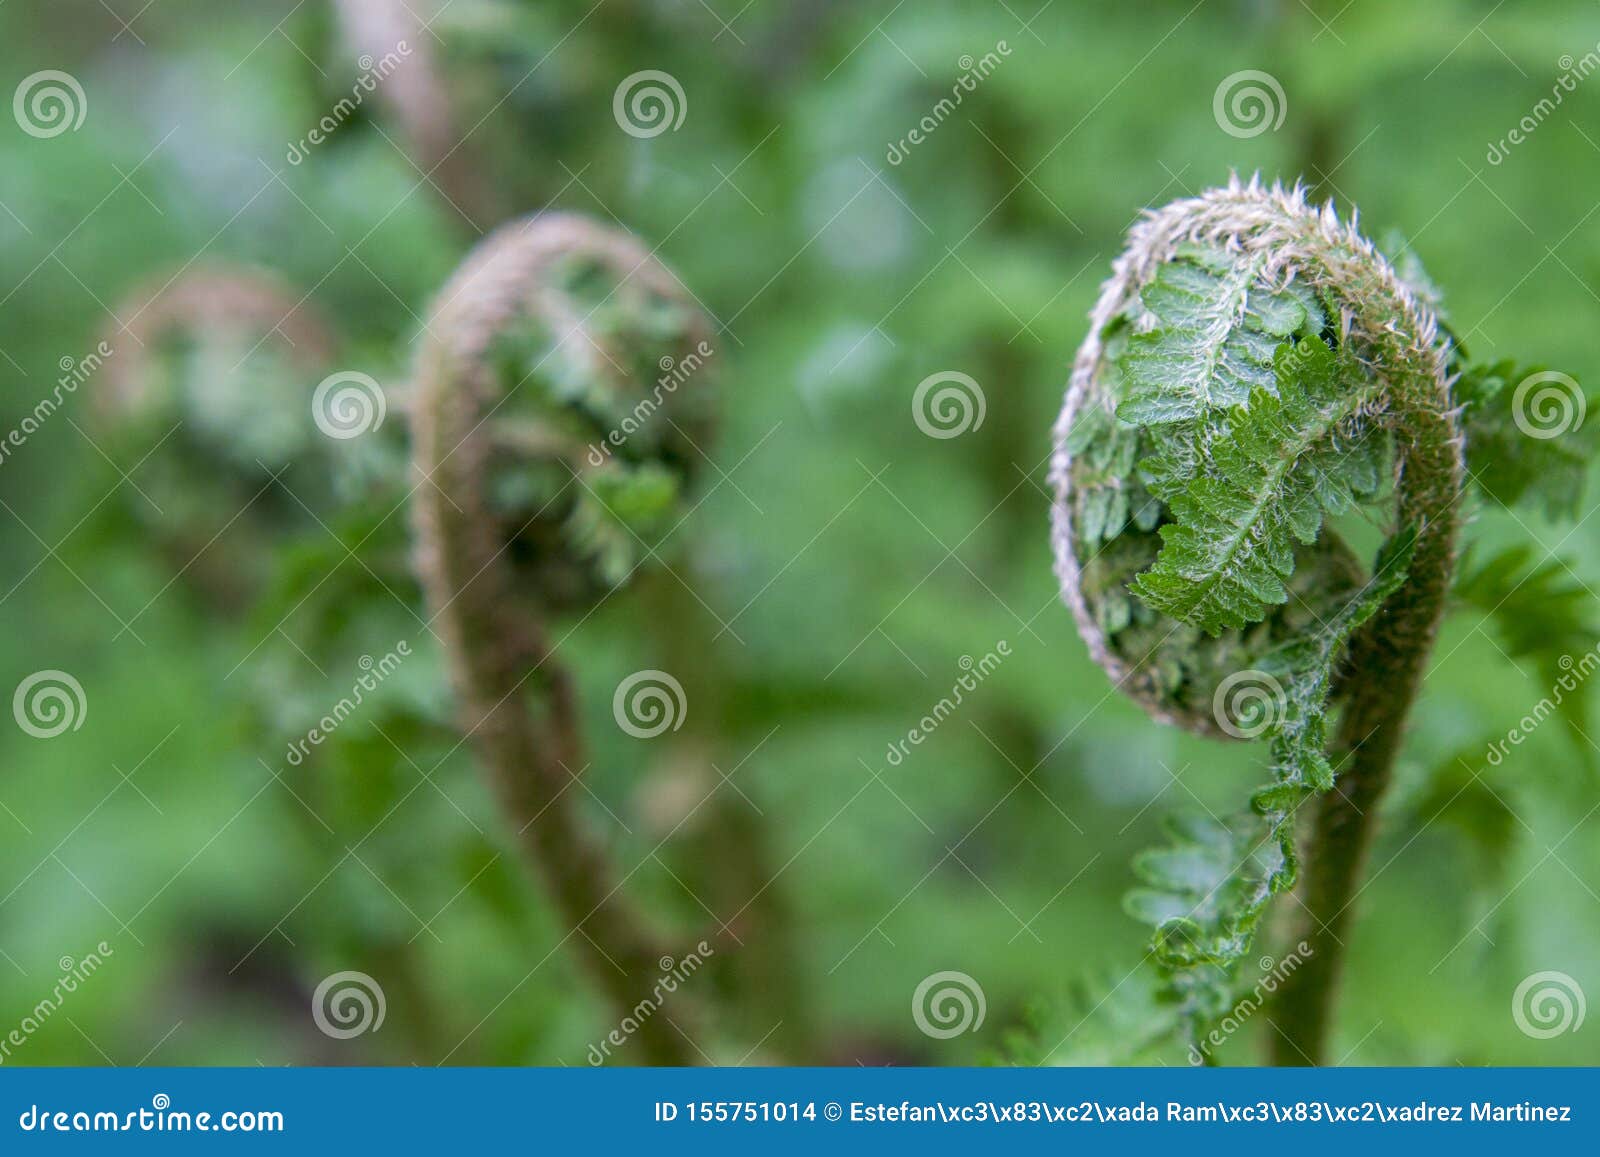 green leaves of a fern opening